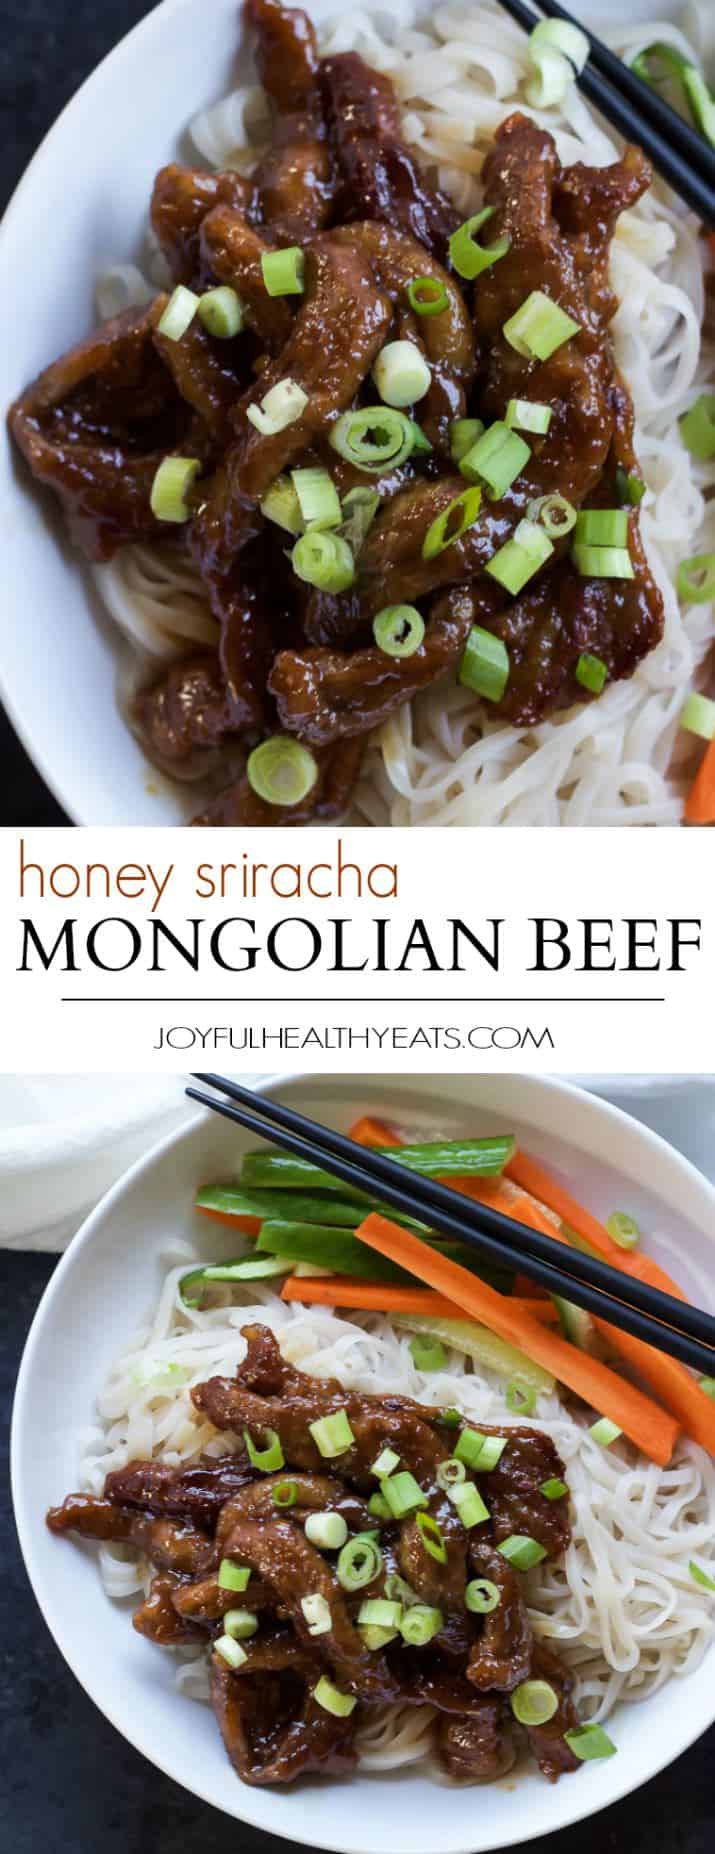 A collage of two images of honey sriracha Mongolian beef over brown rice noodles